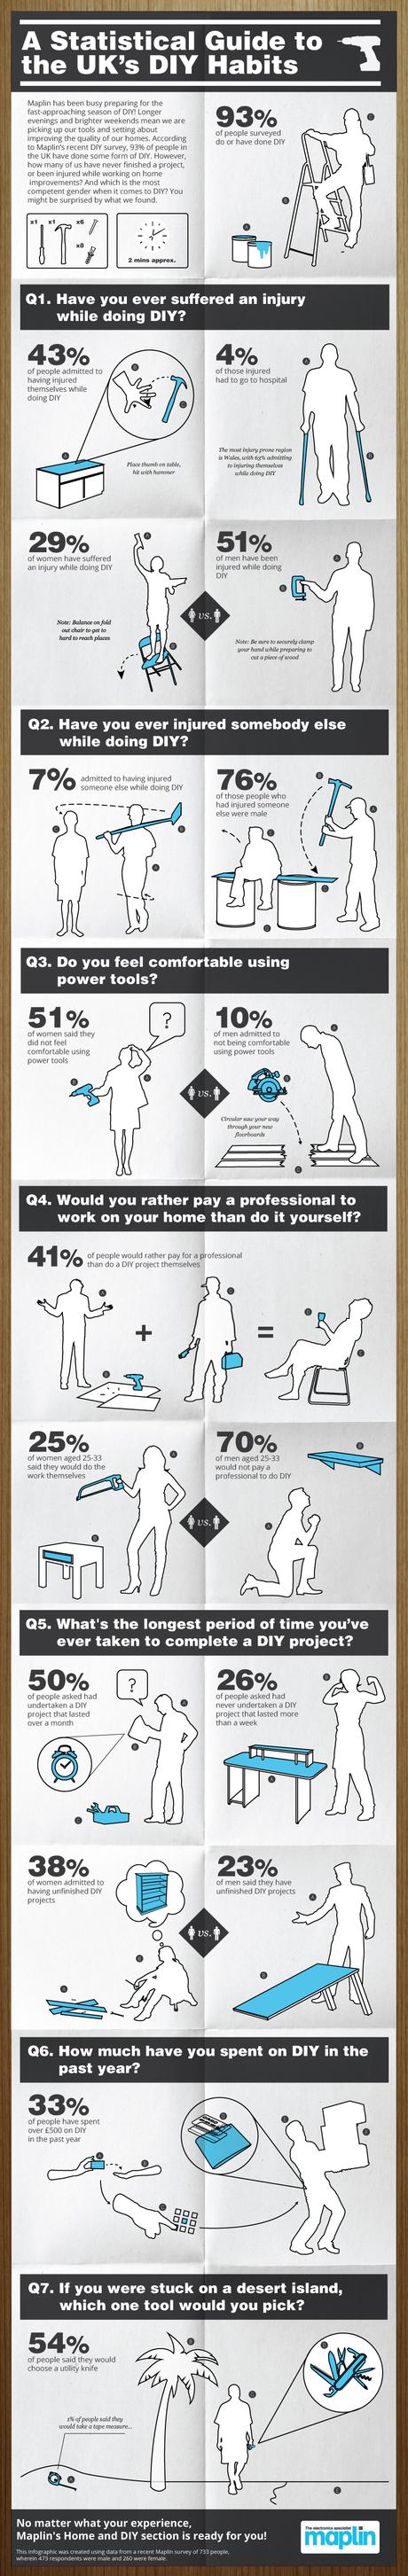 41% of people would rather pay a professional than do their own DIY